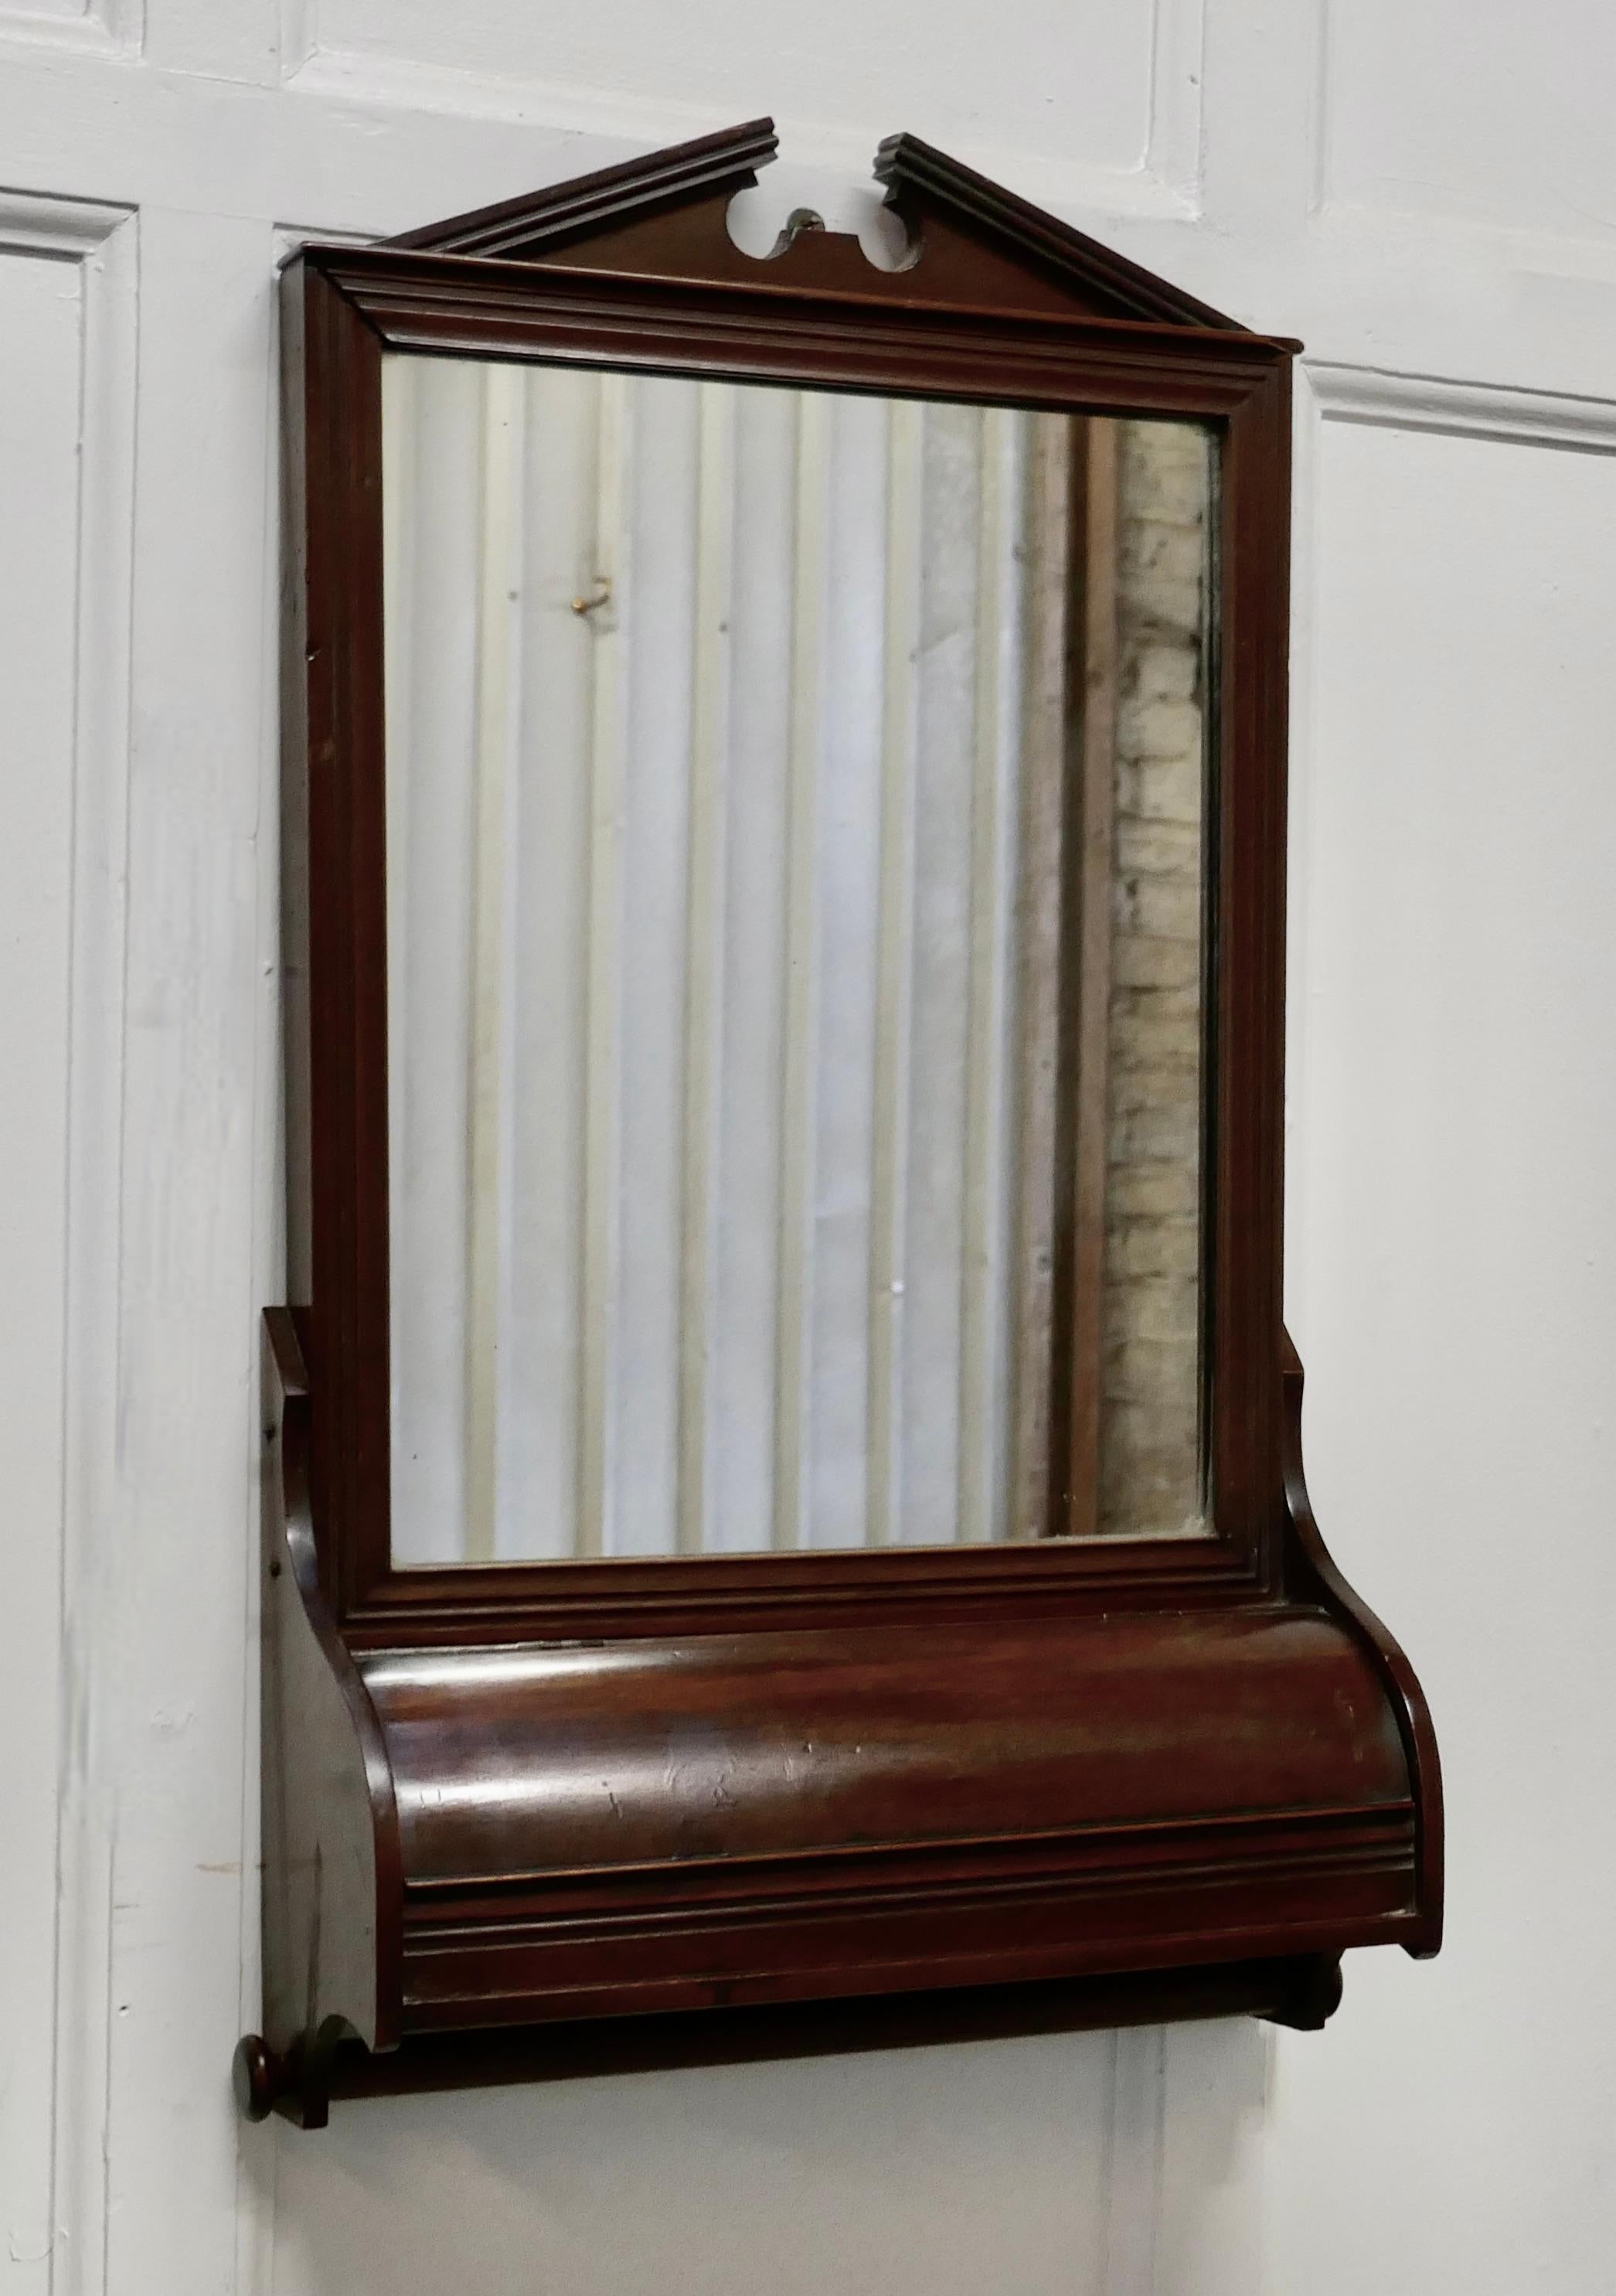 Victorian mahogany bathroom wall mirror with towel rail

This is a very attractive piece, which would work very well in a bathroom or cloak room
The mirror has a swan neck pediment at the top and small compartment for storage and below this there